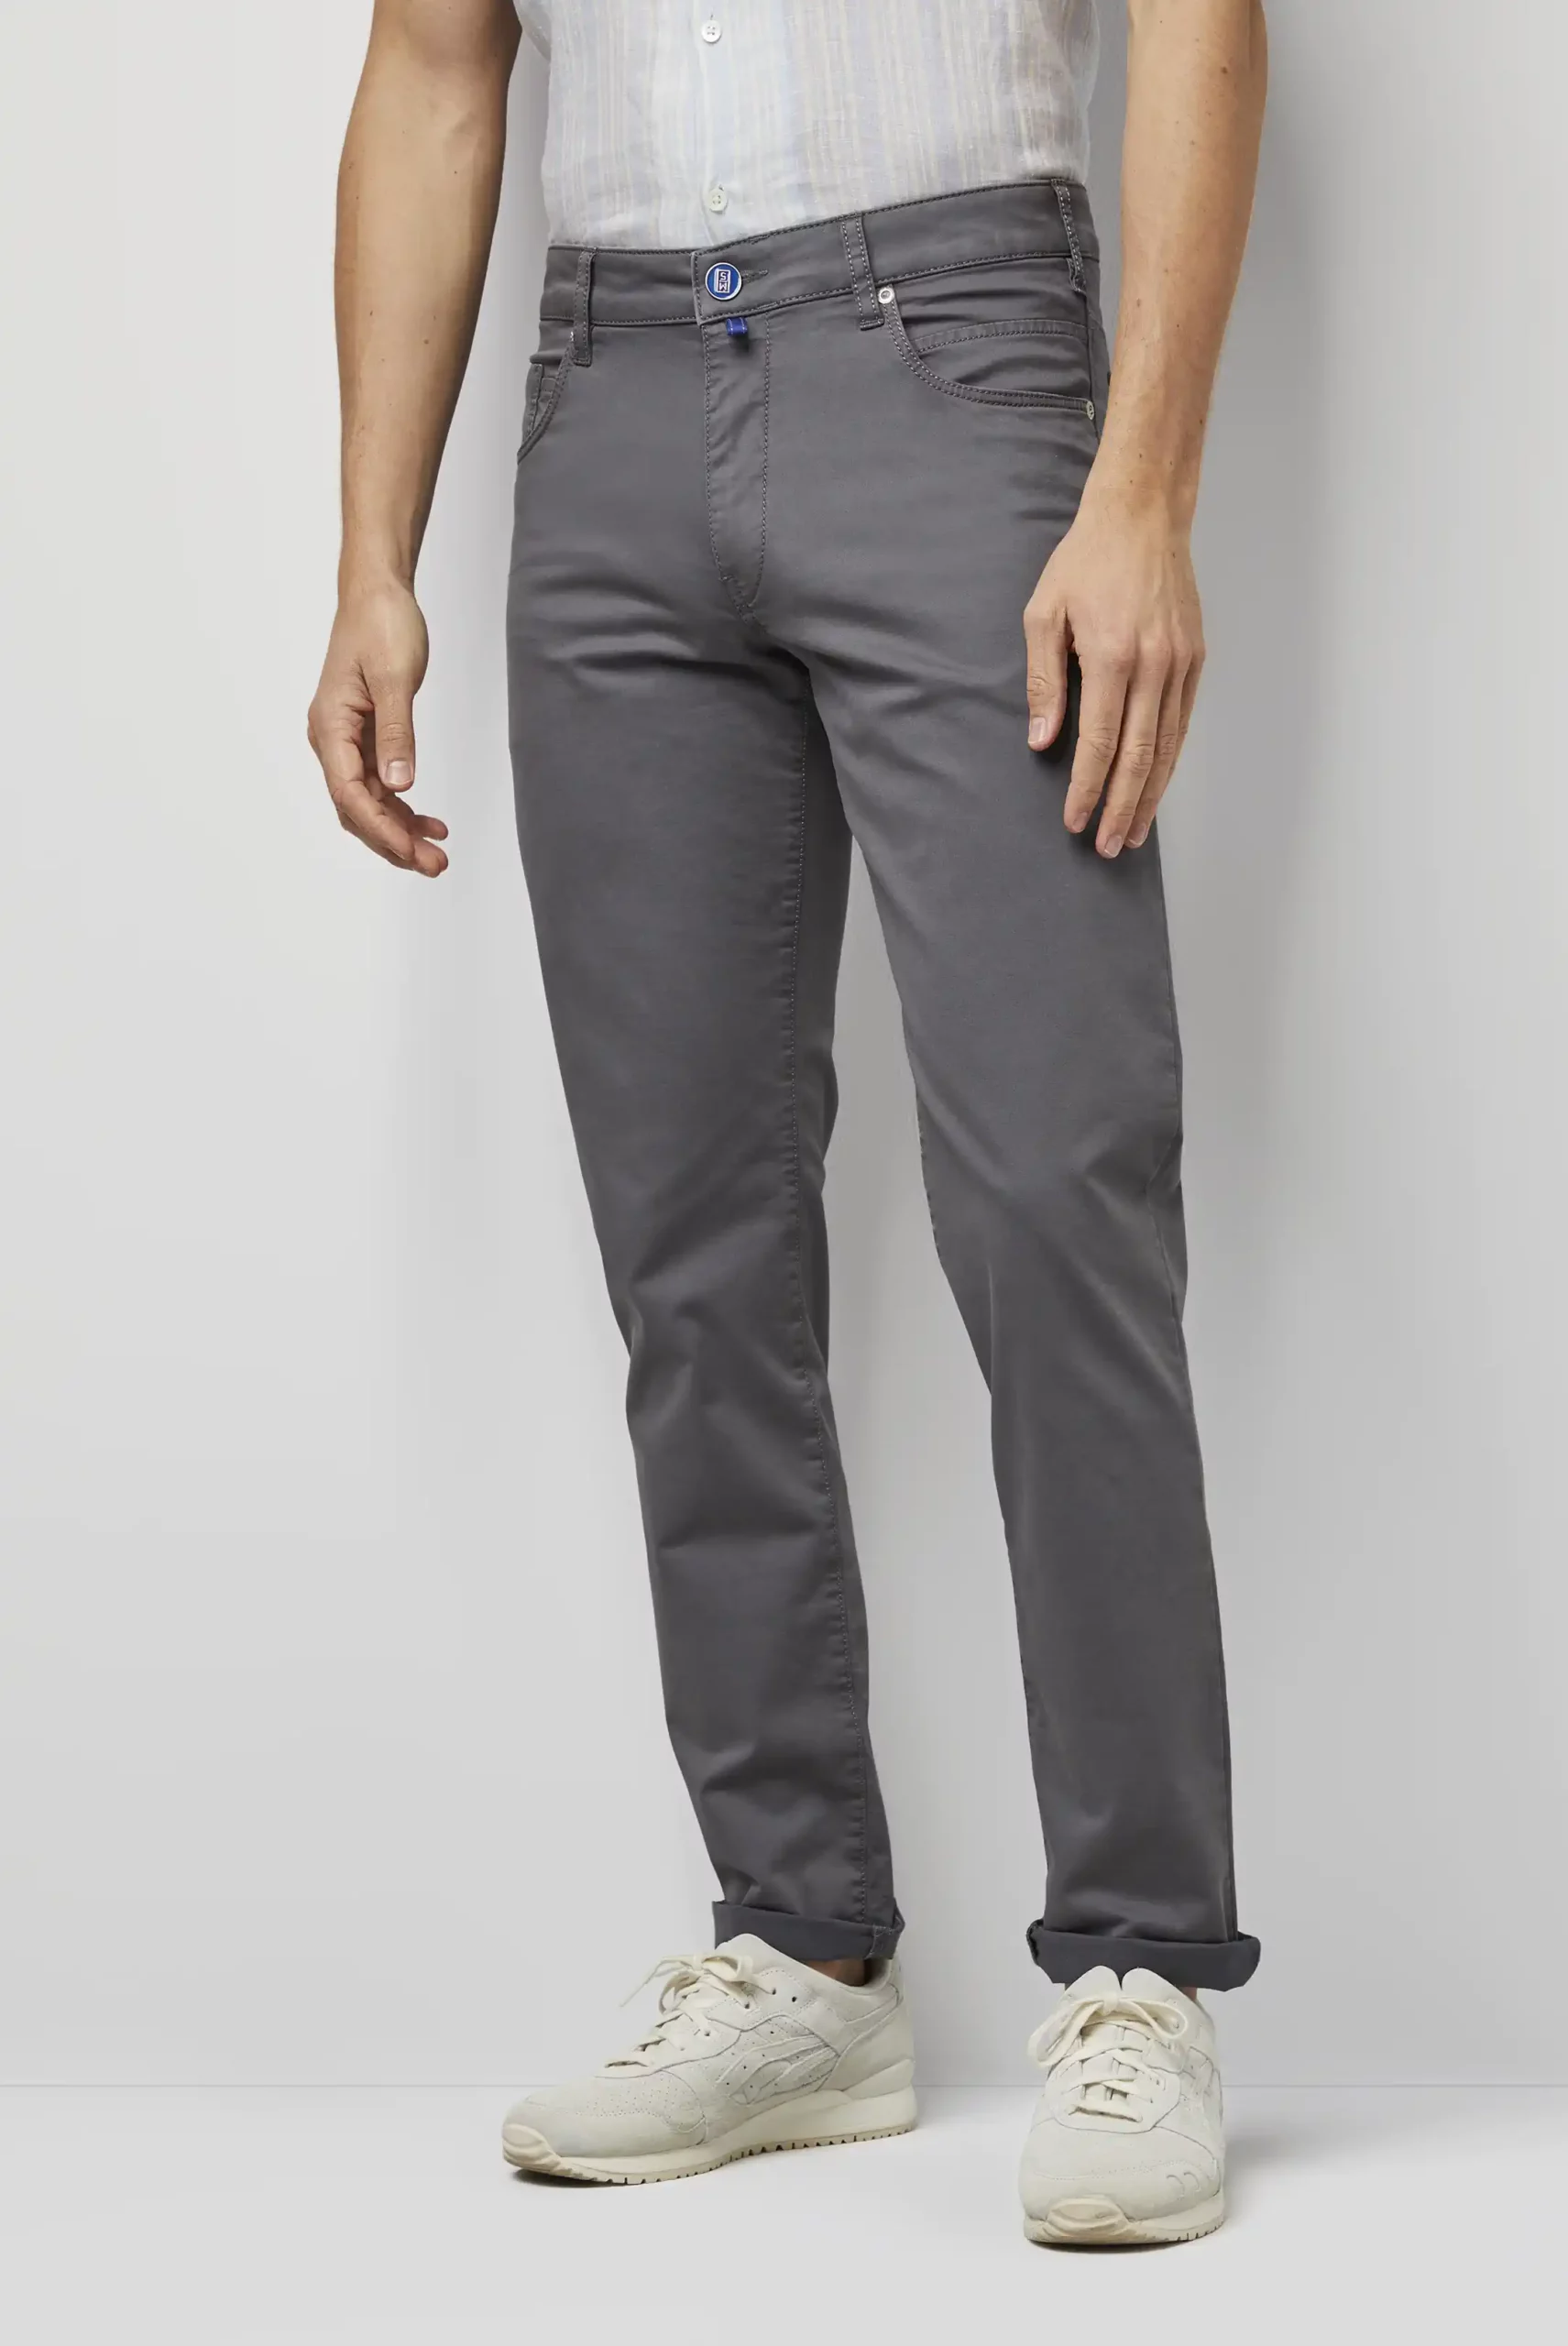 Fivepocket trousers by STEFANO RICCI  Shop Online